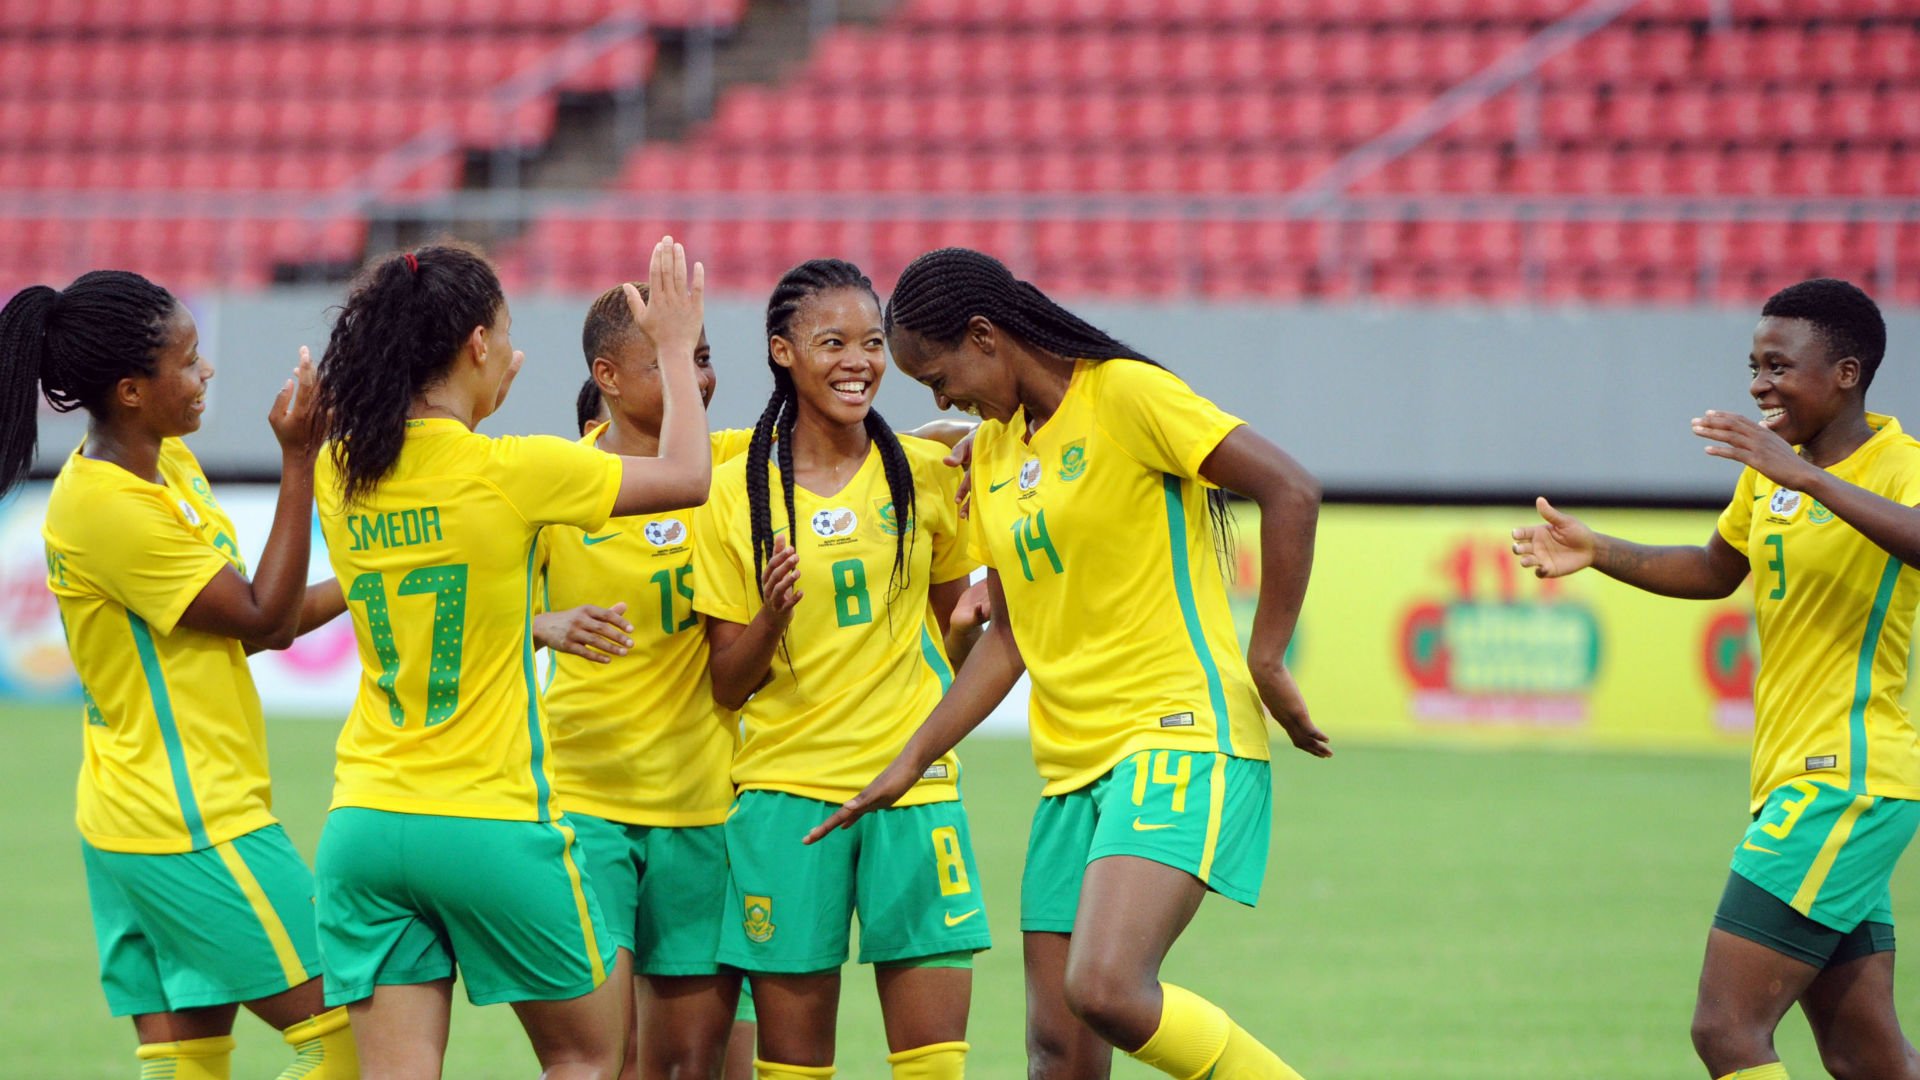 Paris 2024: Banyana Banyana captain absent from game against Super Falcons